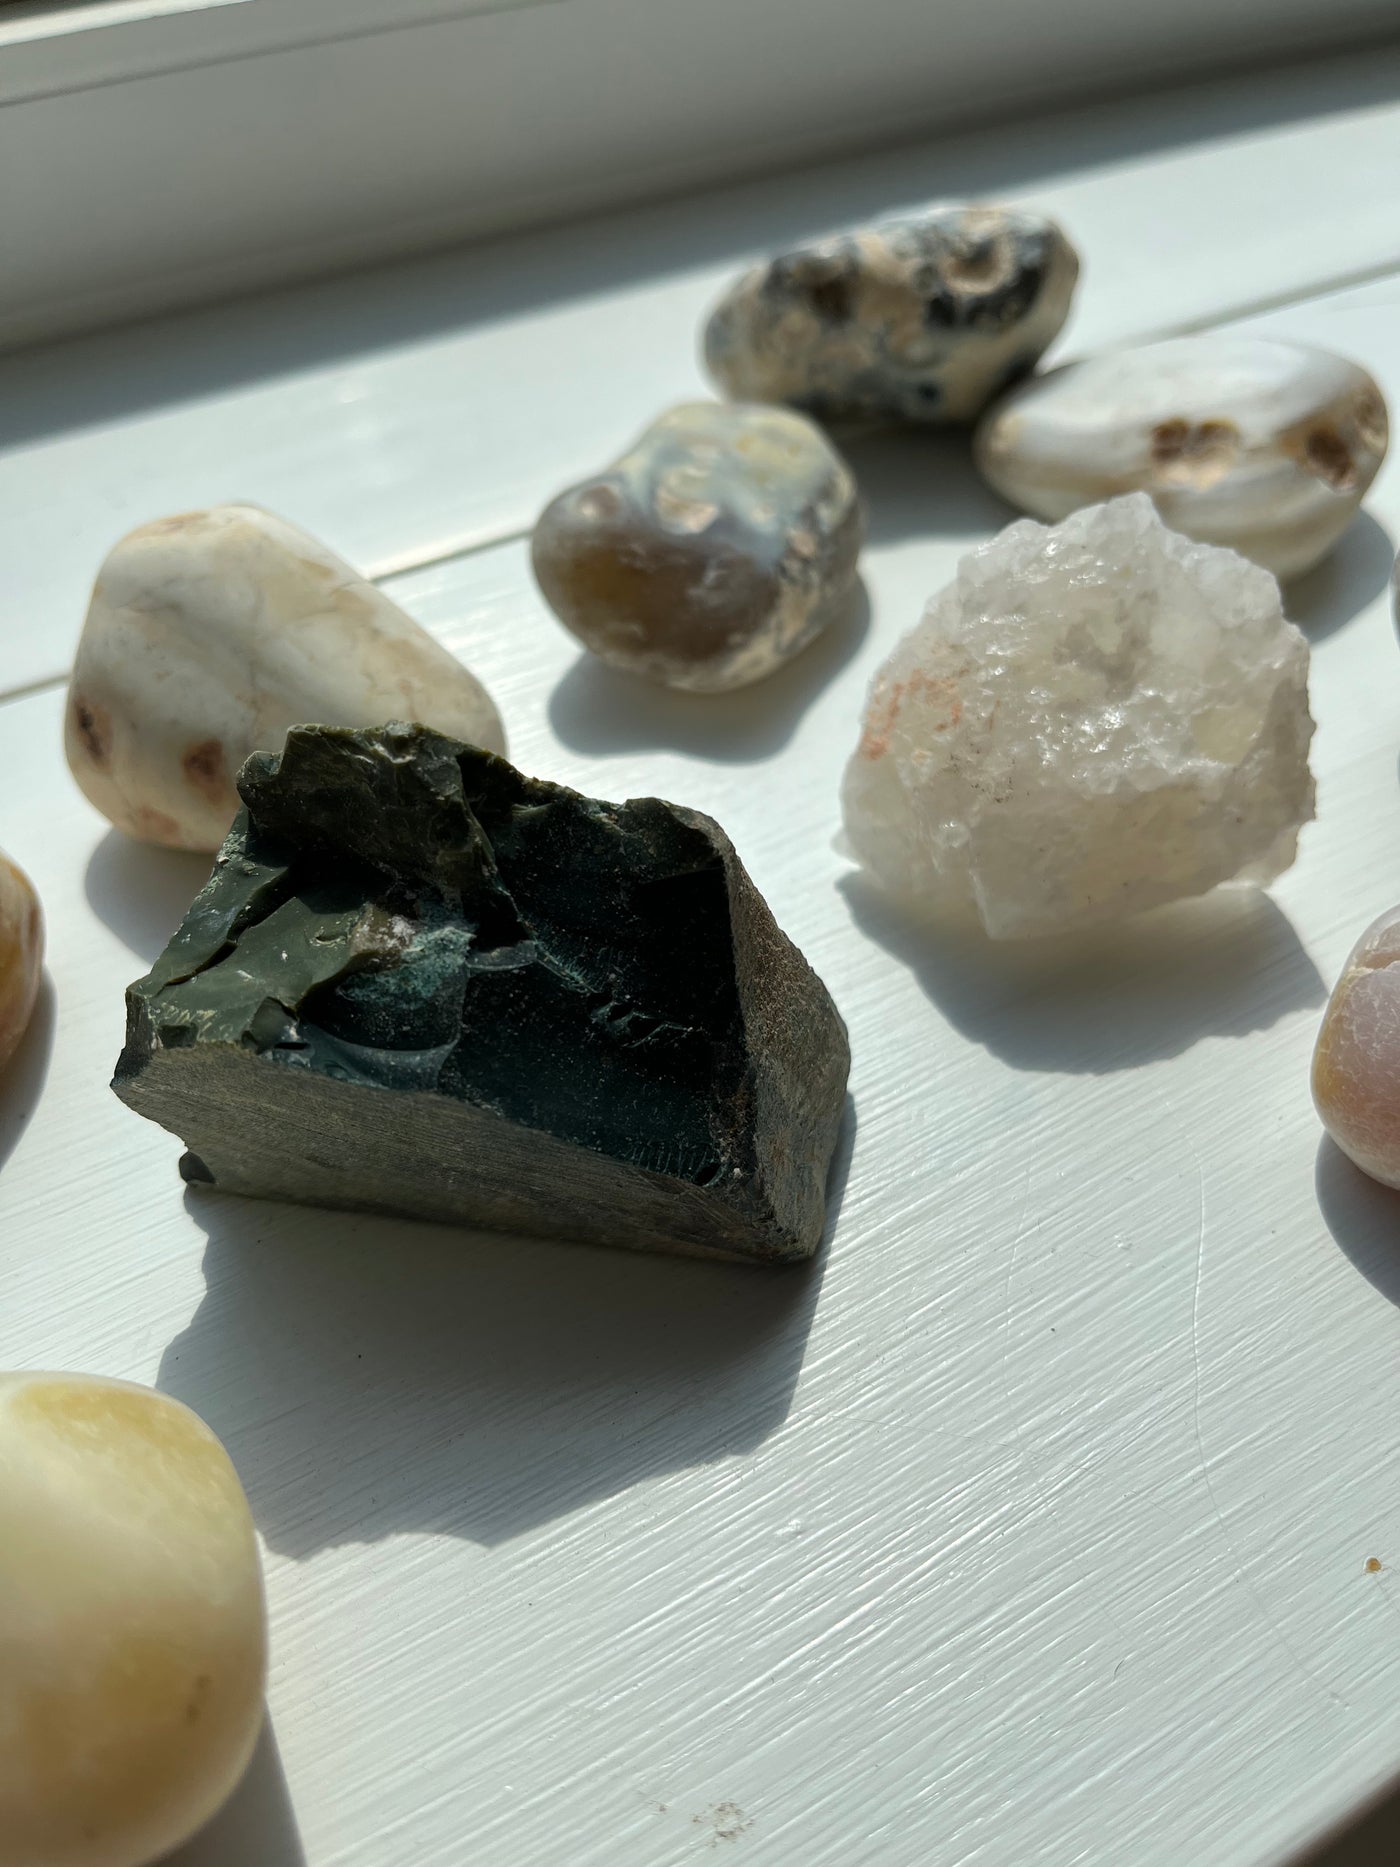 Found Stones and Minerals in a box